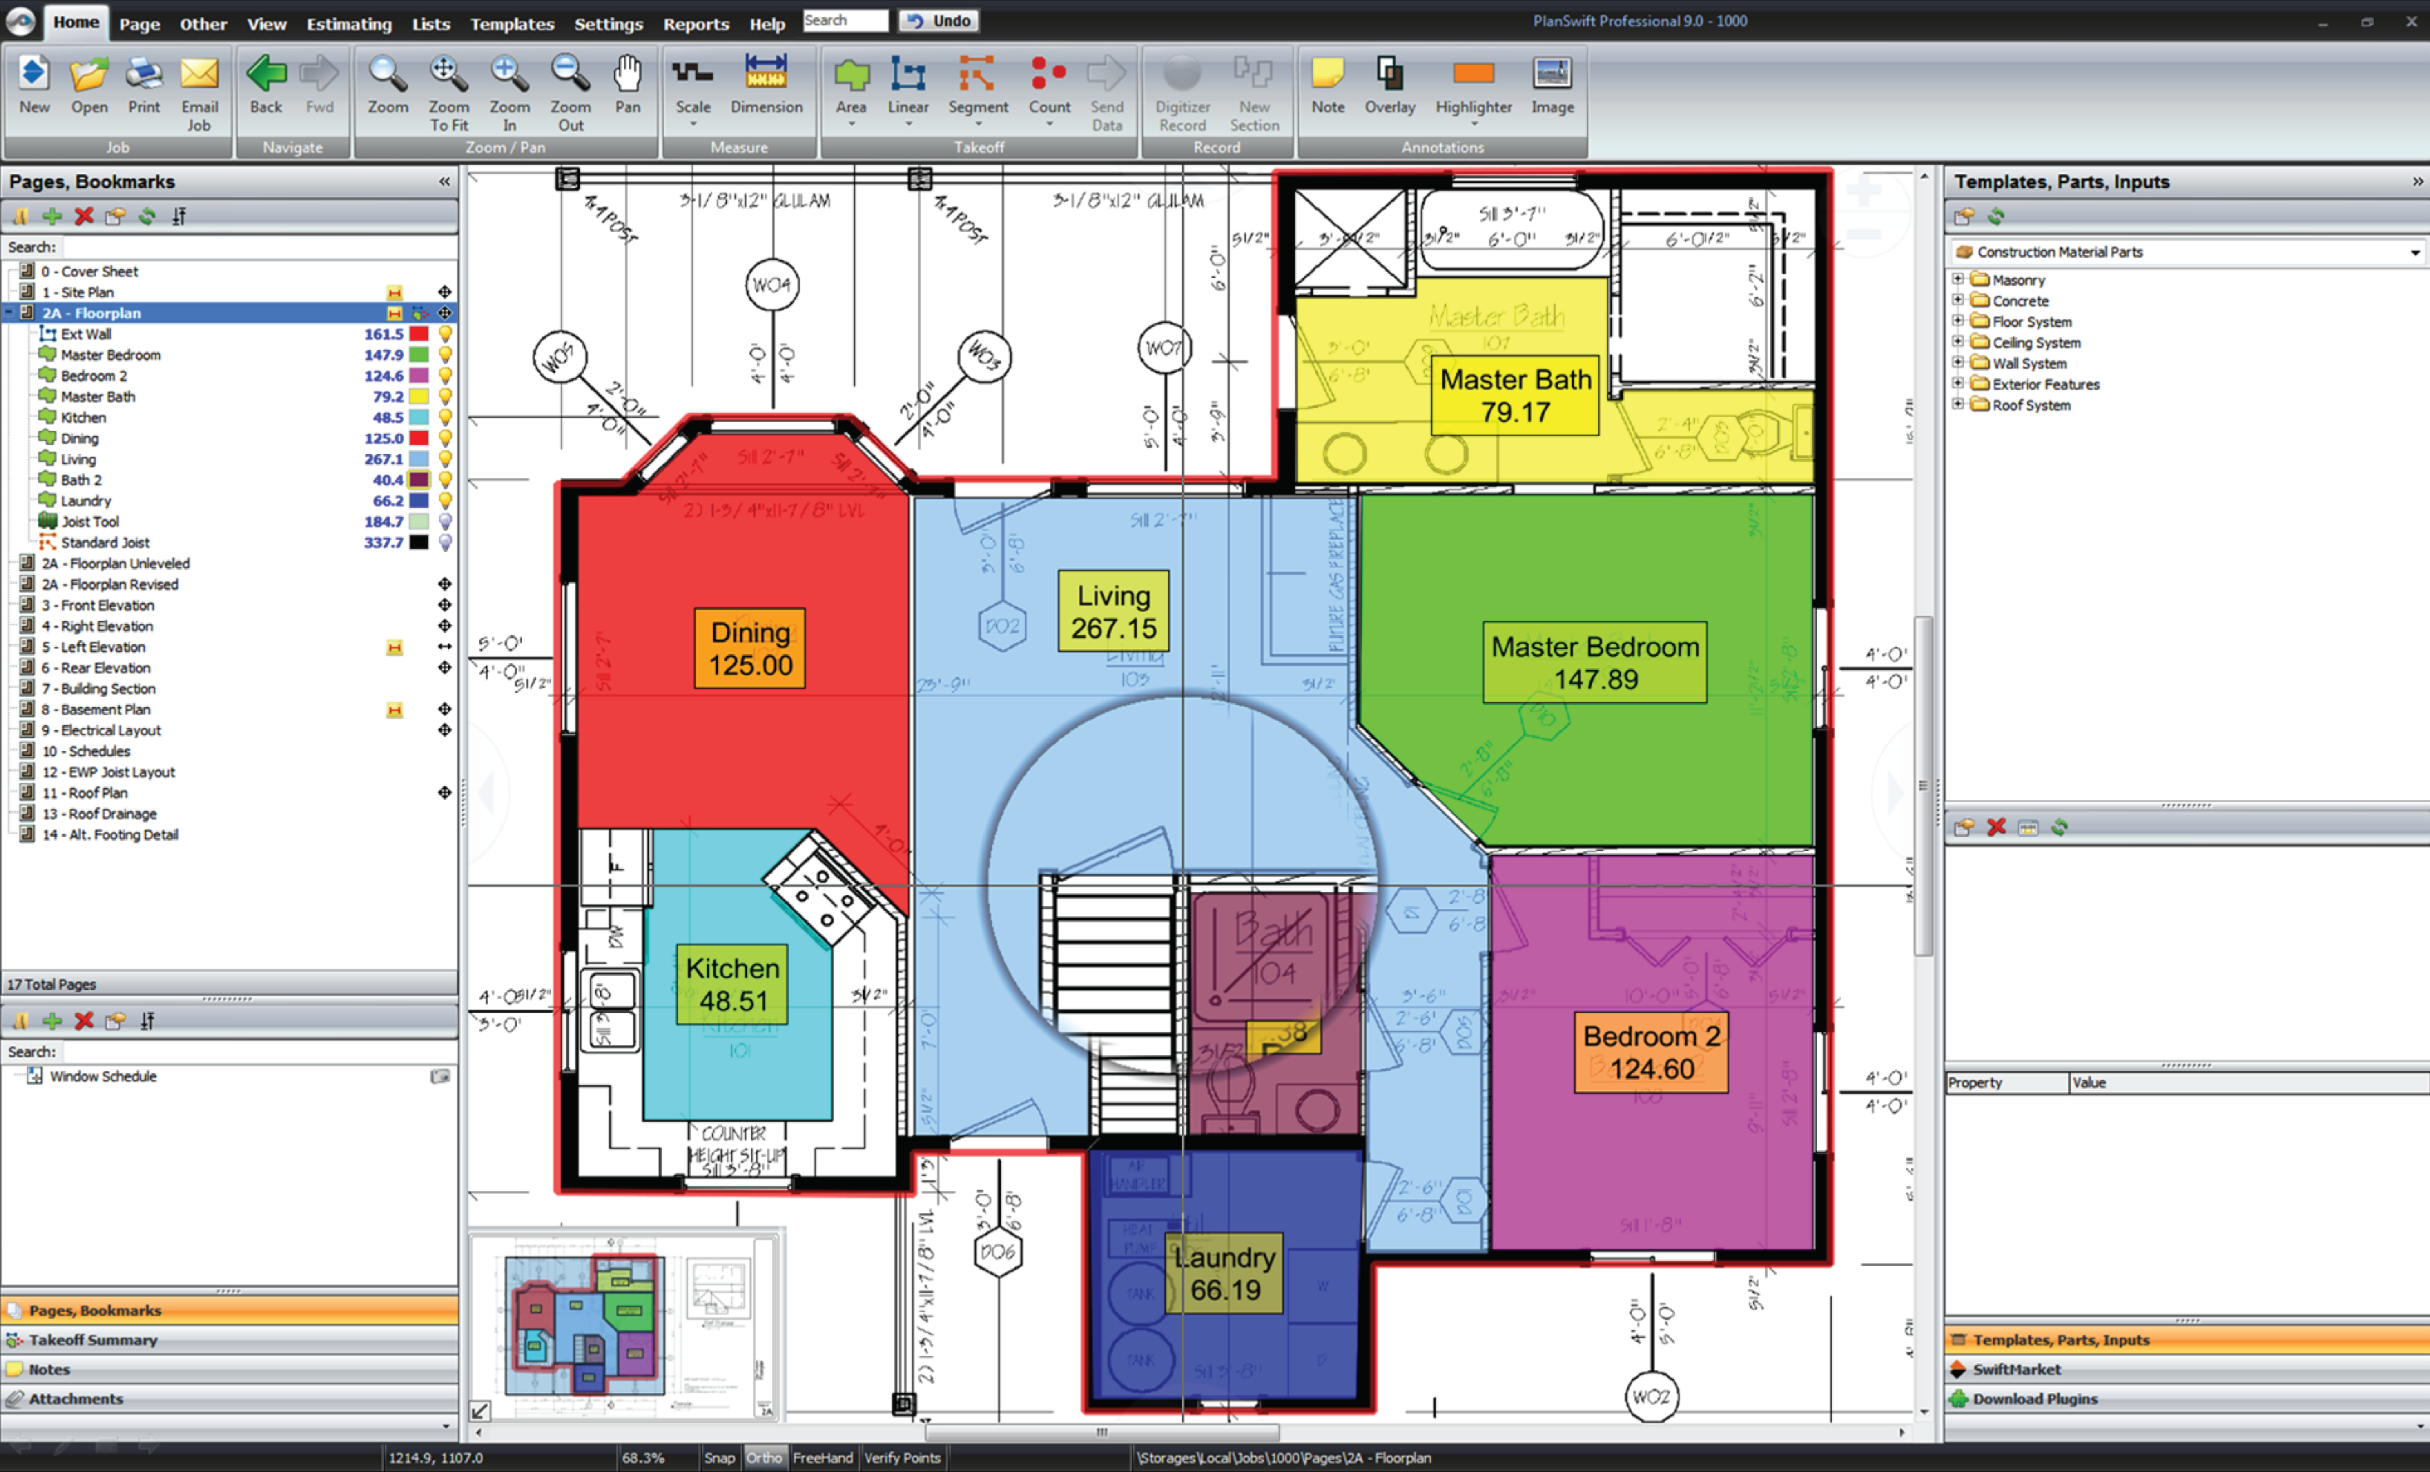 Project Drawings in the PlanSwift Construction Software